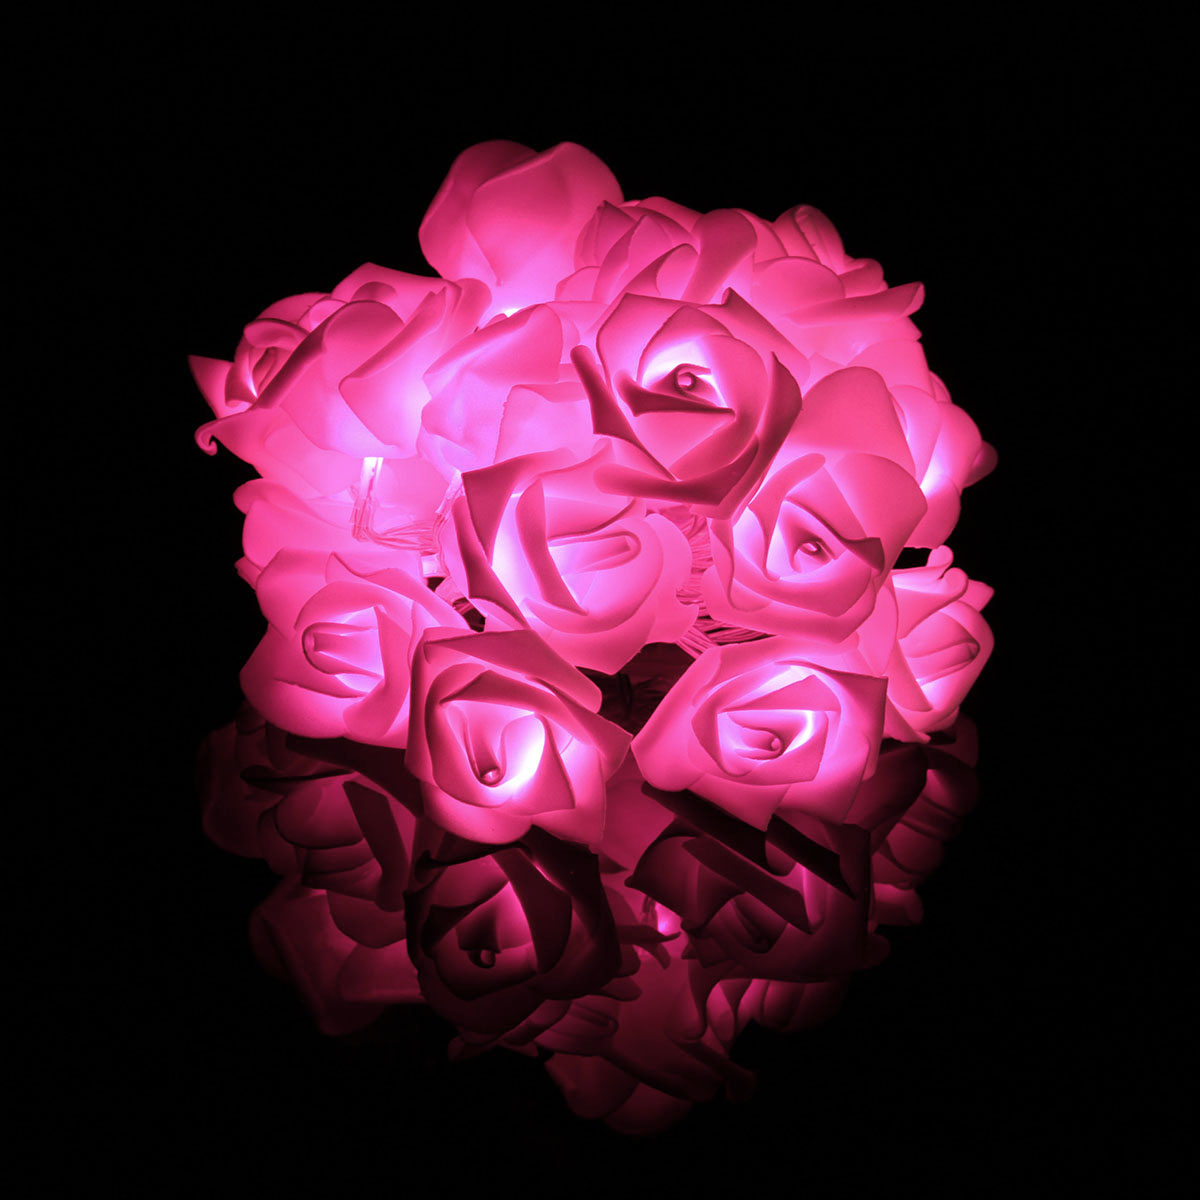 Gadvery 20LEDs Rose Flower Fairy LED String Lights for Wedding Valentine's Day Anniversary Christmas Decor - image 1 of 2